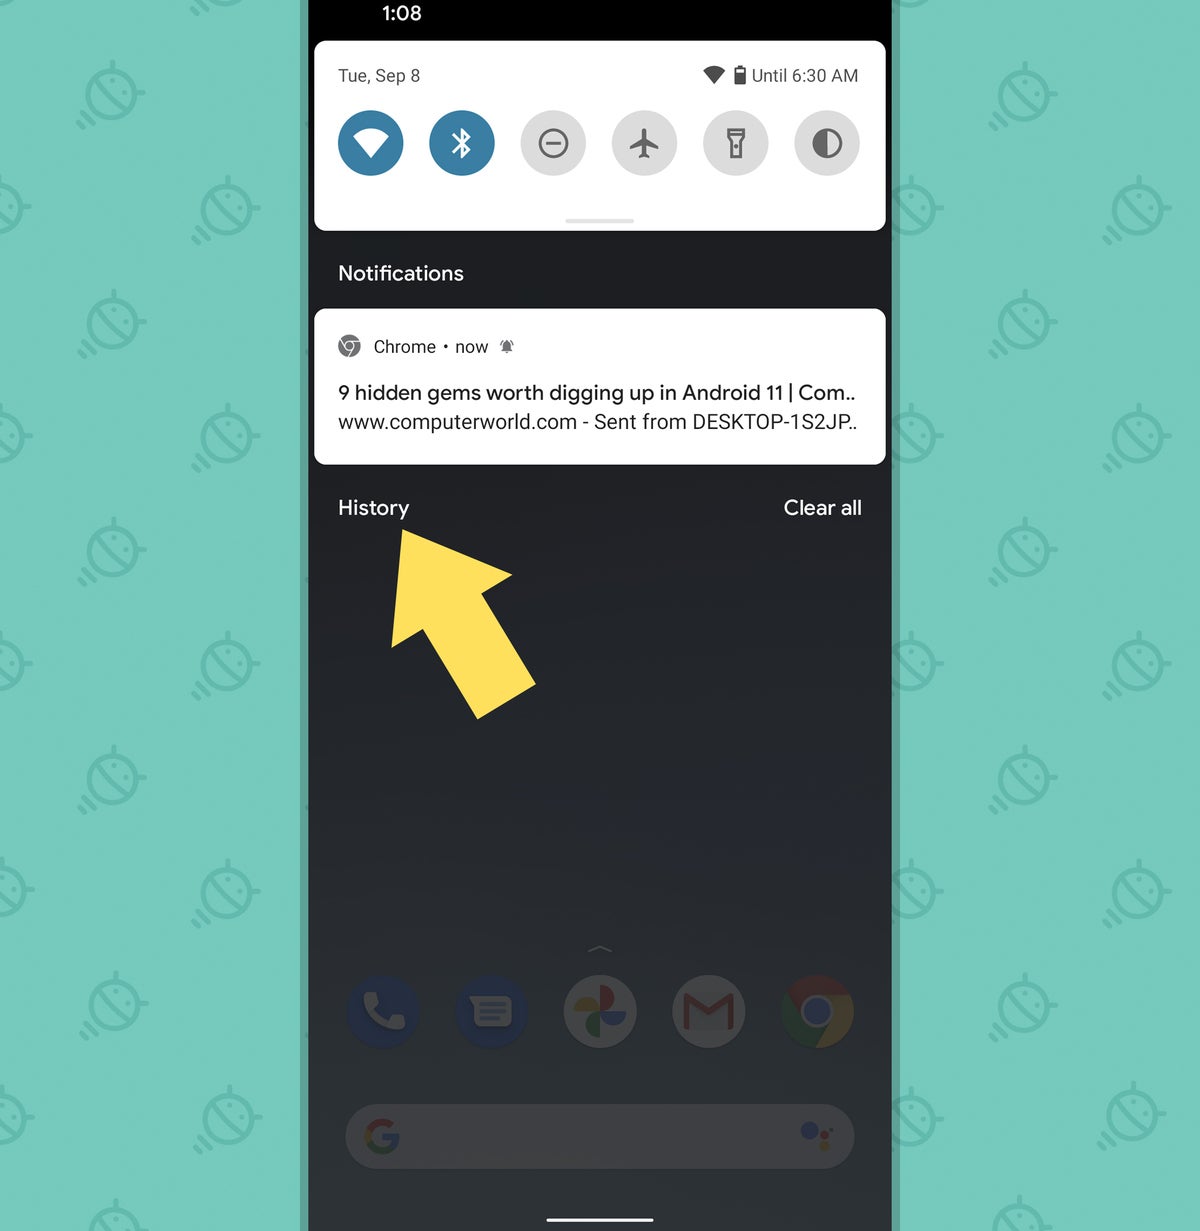 Android 11: notification history option